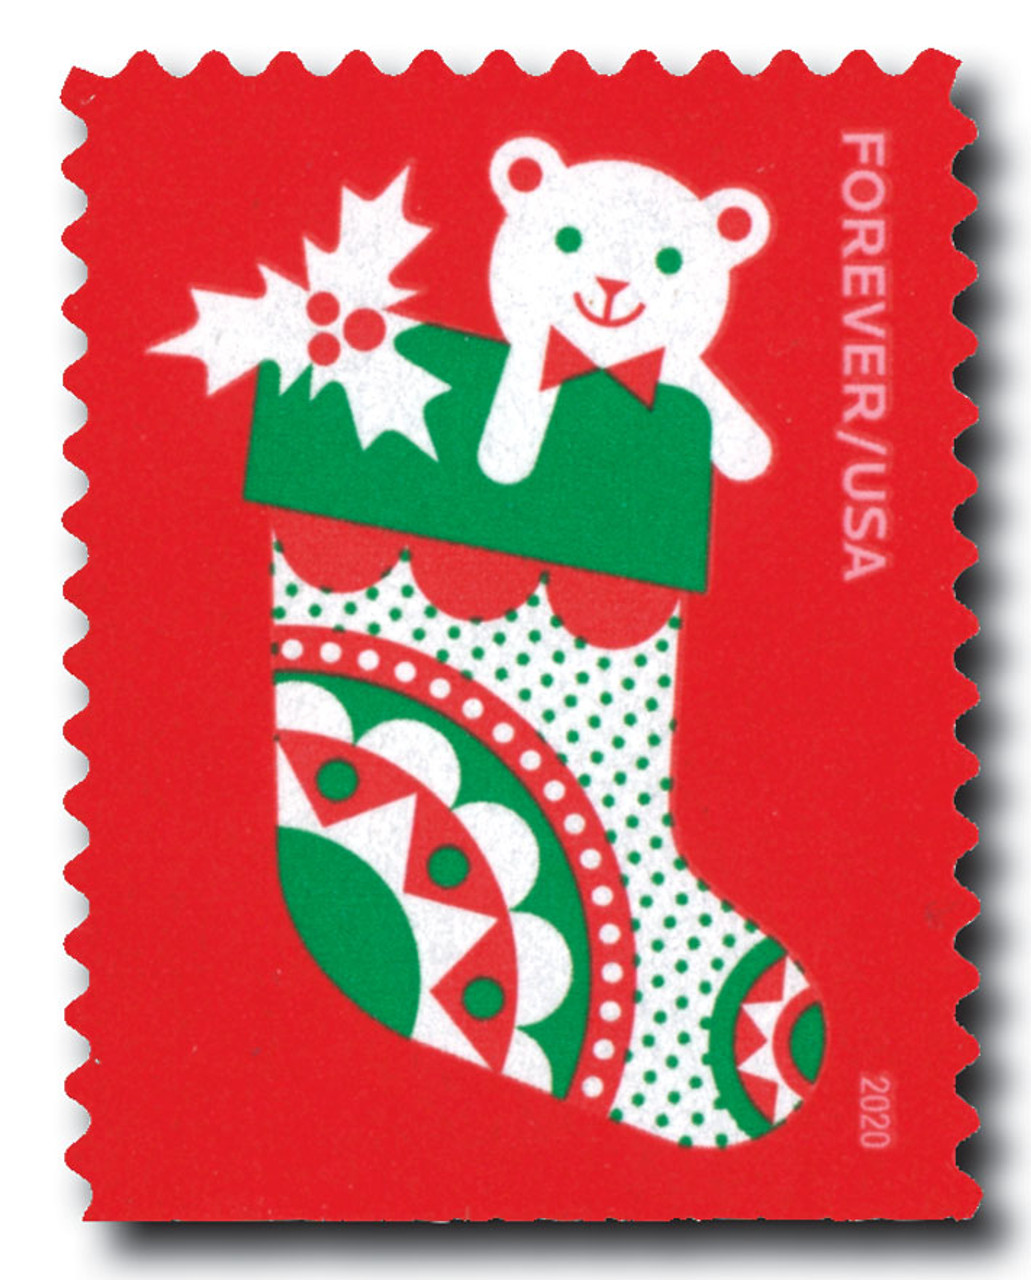 5528 - 2020 First-Class Forever Stamp - Holiday Delights